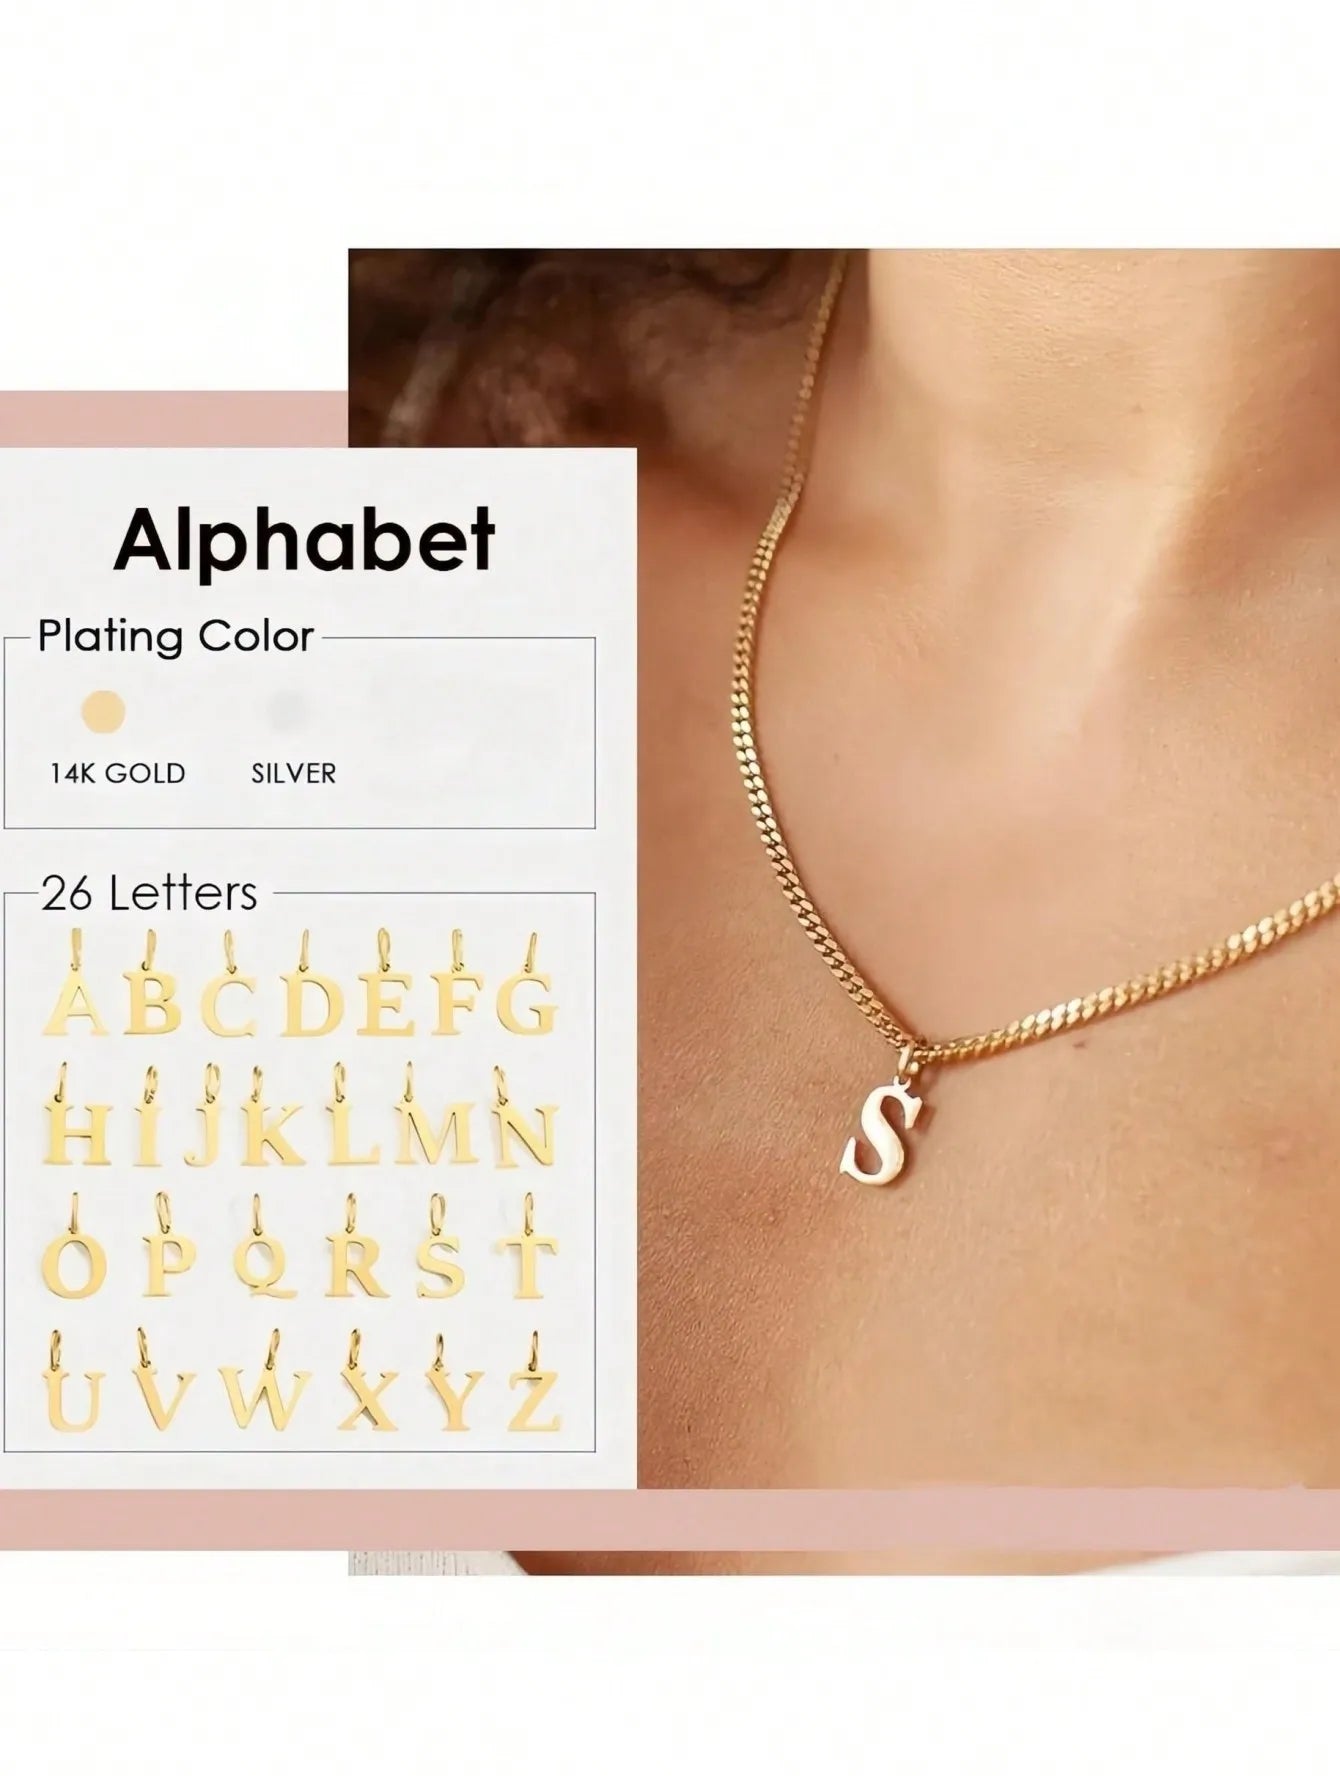 Personalized Initial Necklace: Stainless Steel